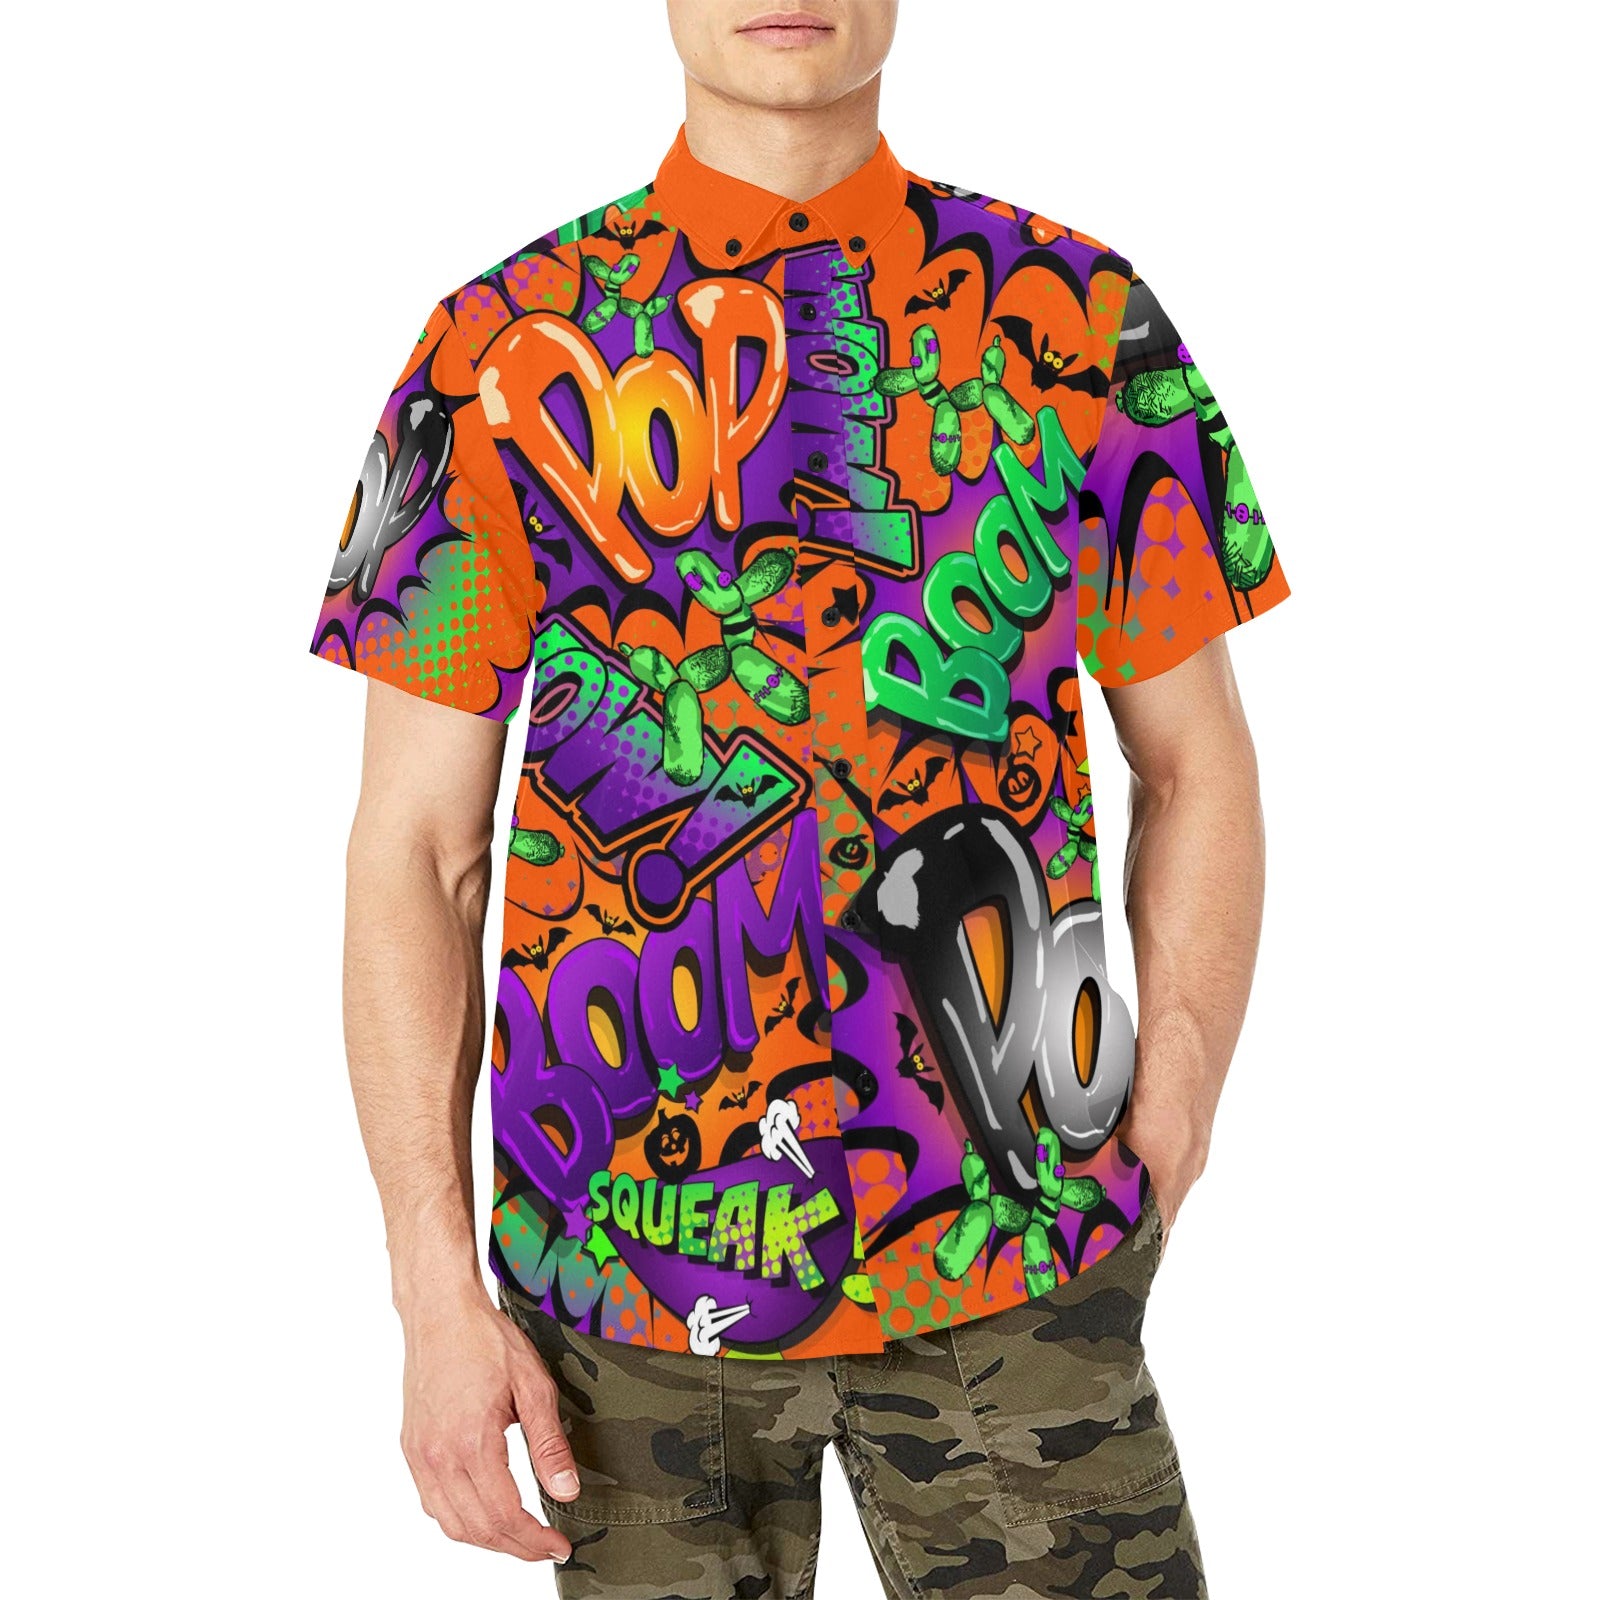 Orange pop art Halloween shirt with pocket for balloon twisters and face painters